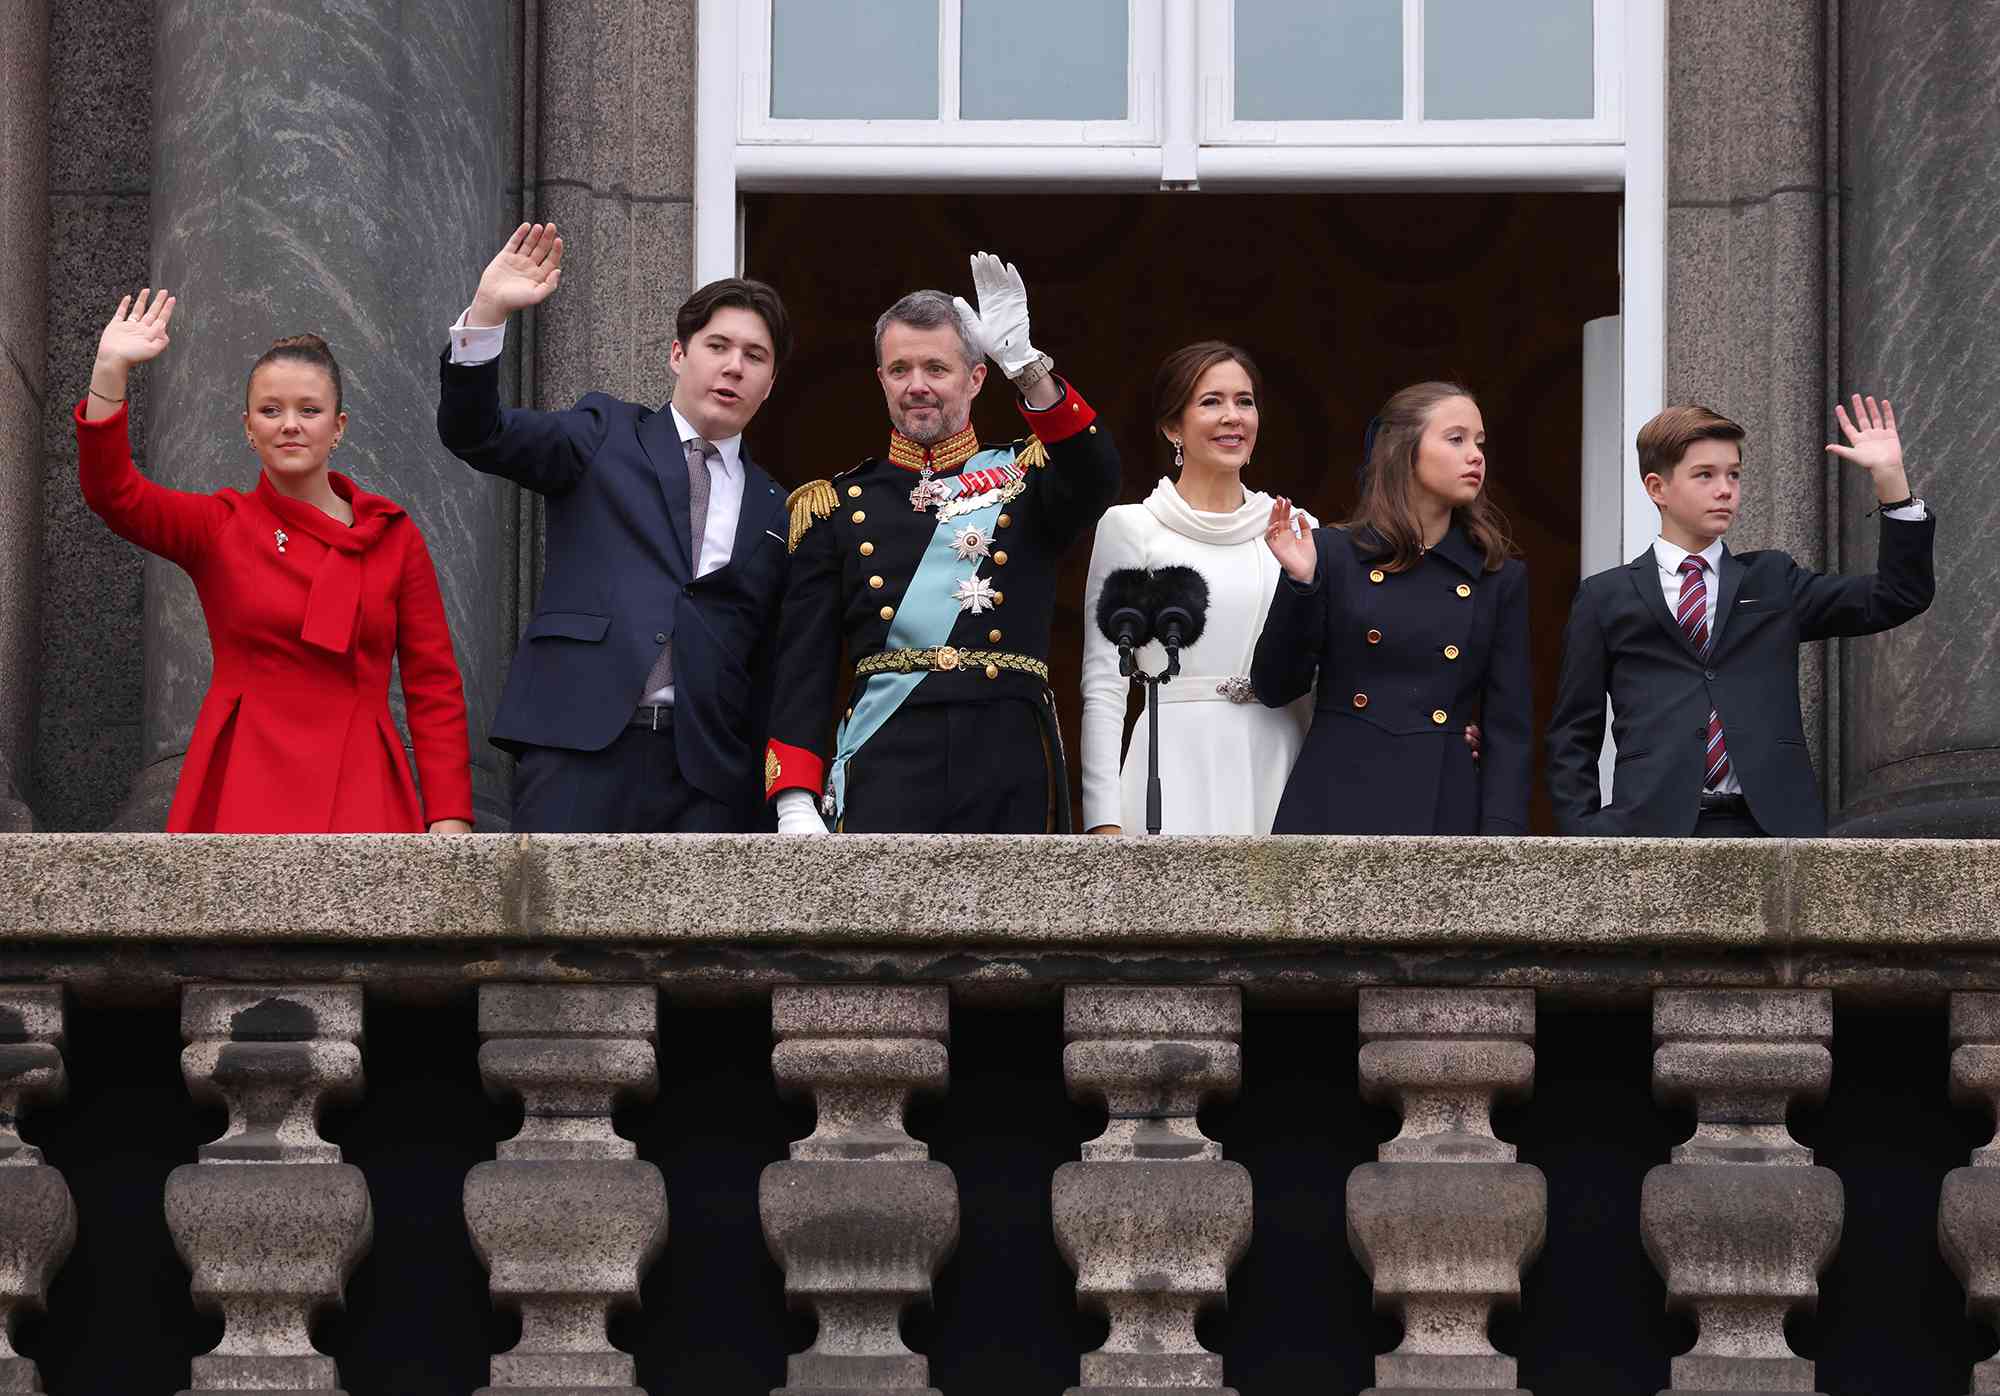 Princess Isabella of Denmark, Prince Christian of Denmark, King Frederik X of Denmark, Queen Mary of Denmark, Princess Josephine of Denmark and Prince Vincent of Denmark wave to the crowd after a declaration of the King's accession to the throne, from the balcony of Christiansborg Palace